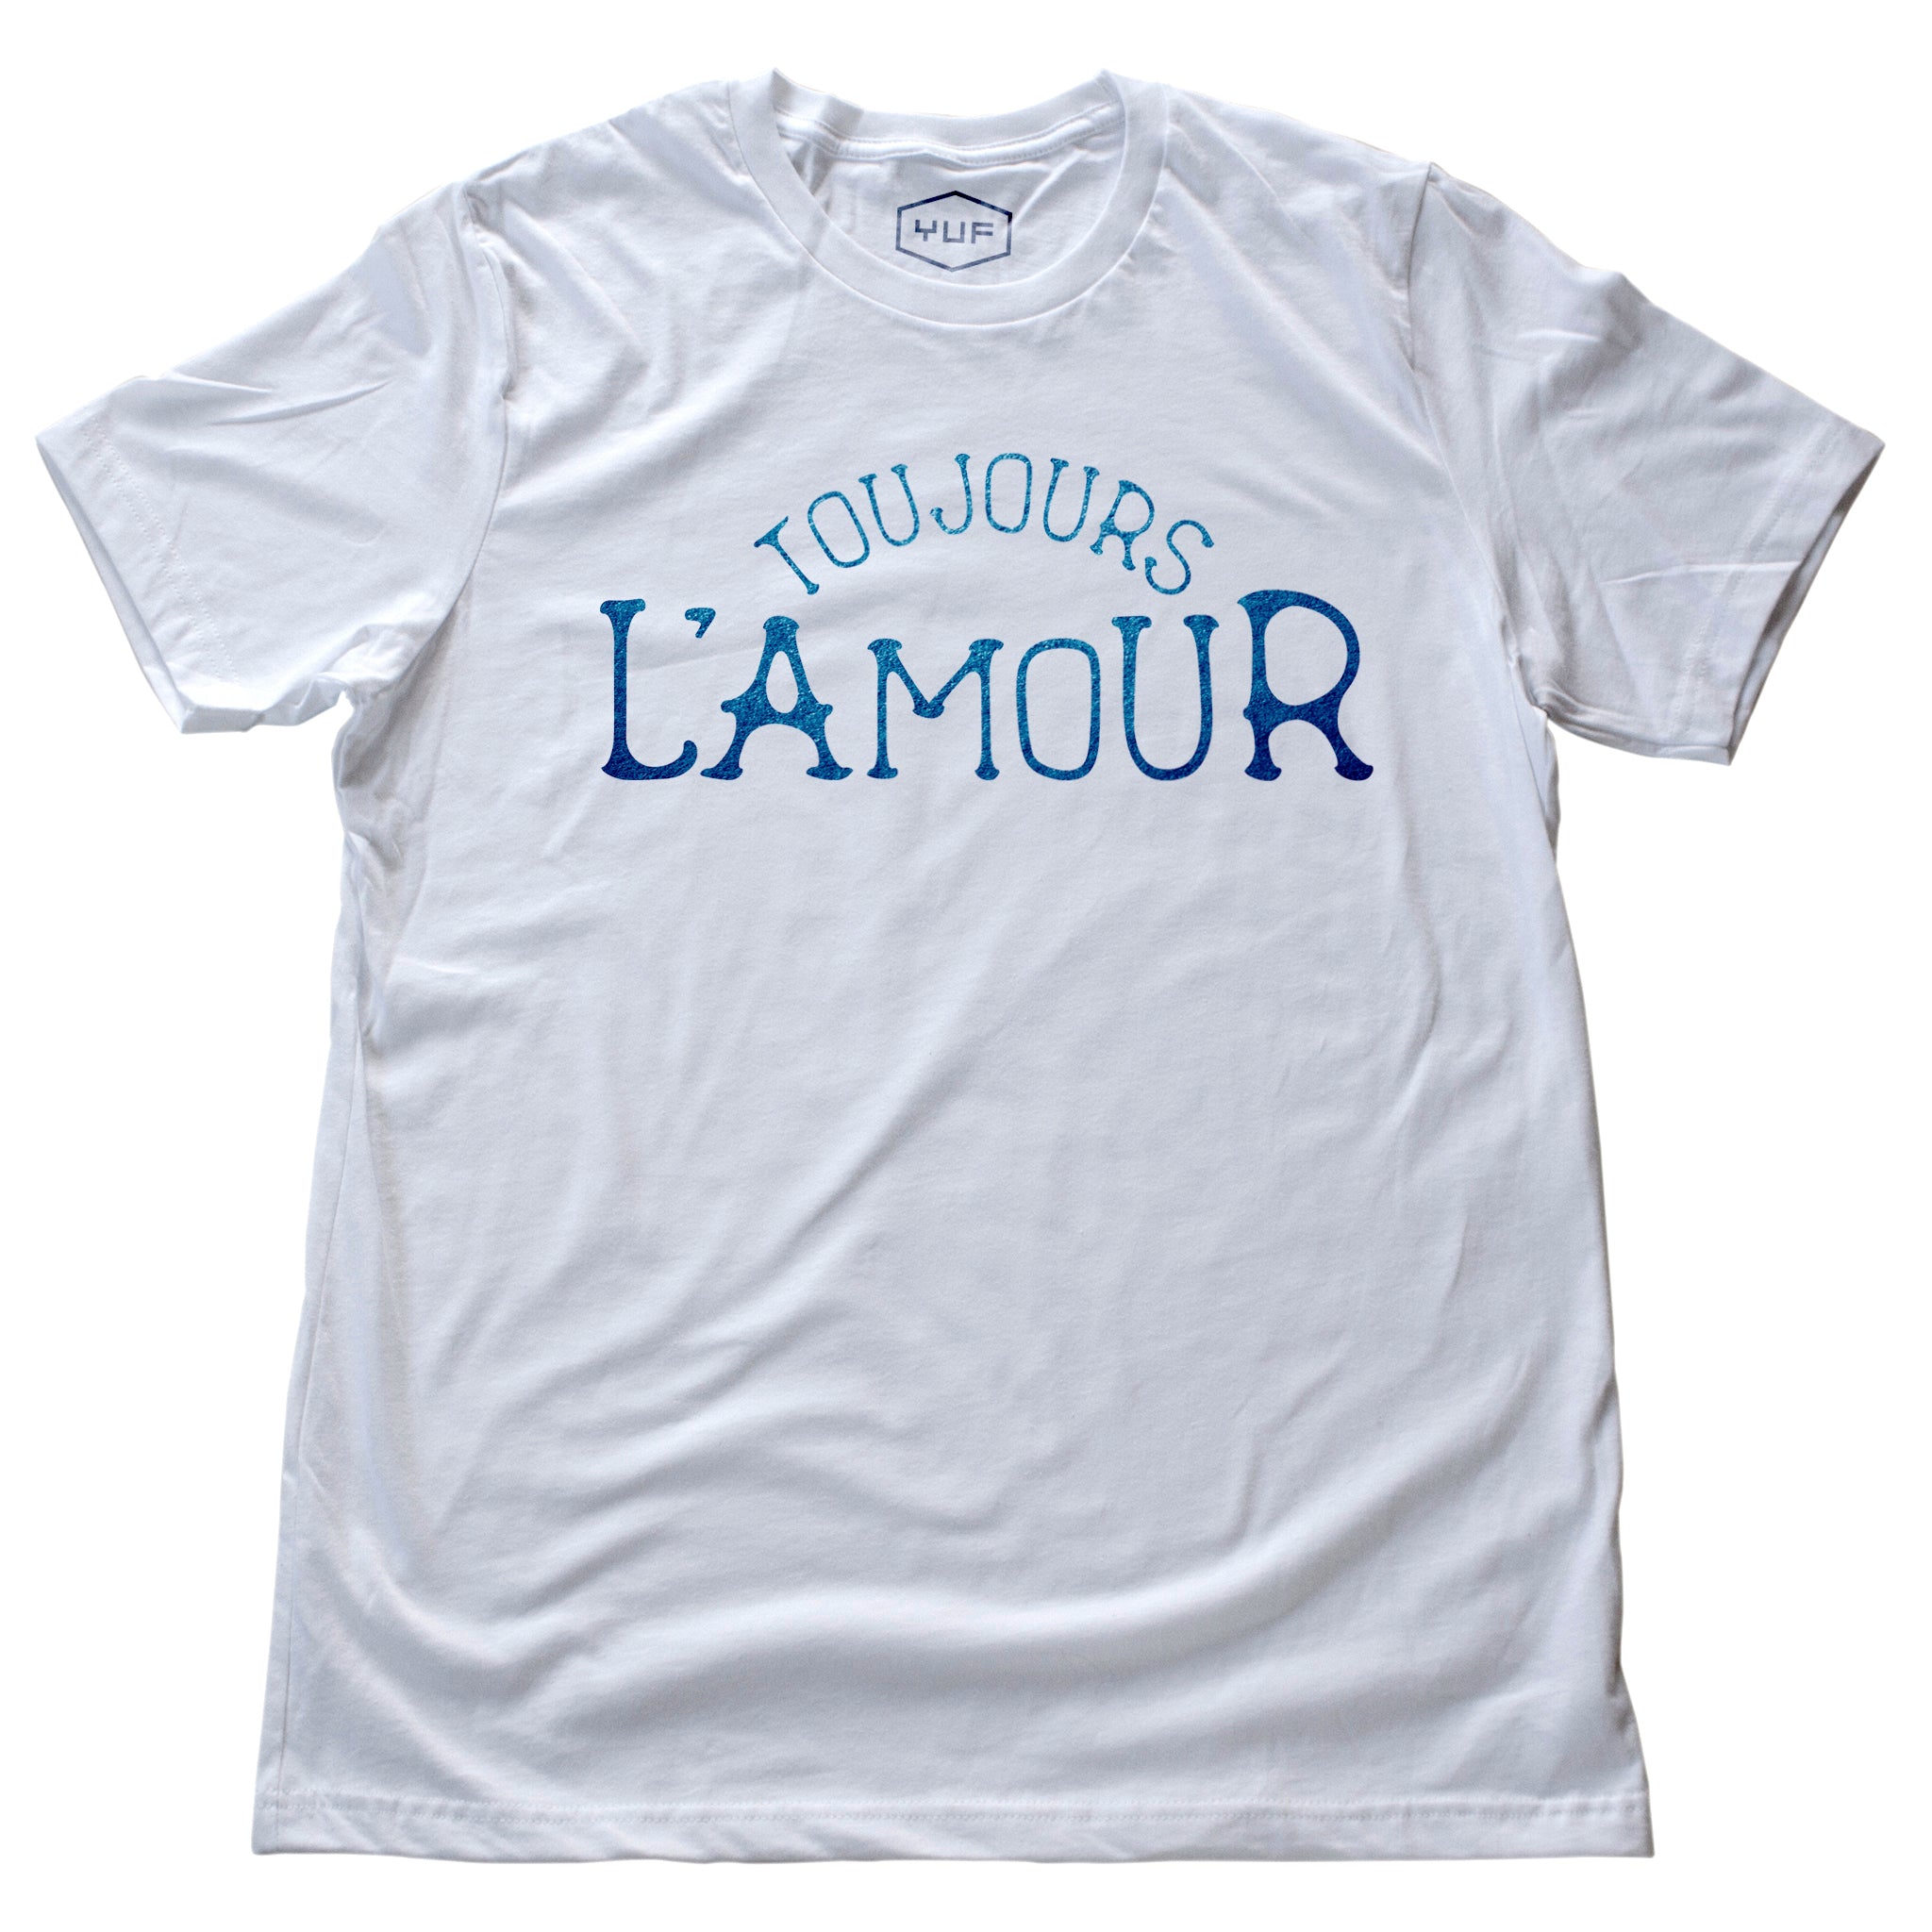 A unisex fashion t-shirt in Classic White with the retro, vintage-inspired typographic statement “TOUJOURS L’AMOUR,” French for “love always.” By fashion brand YUF, from Wolfsaint.net